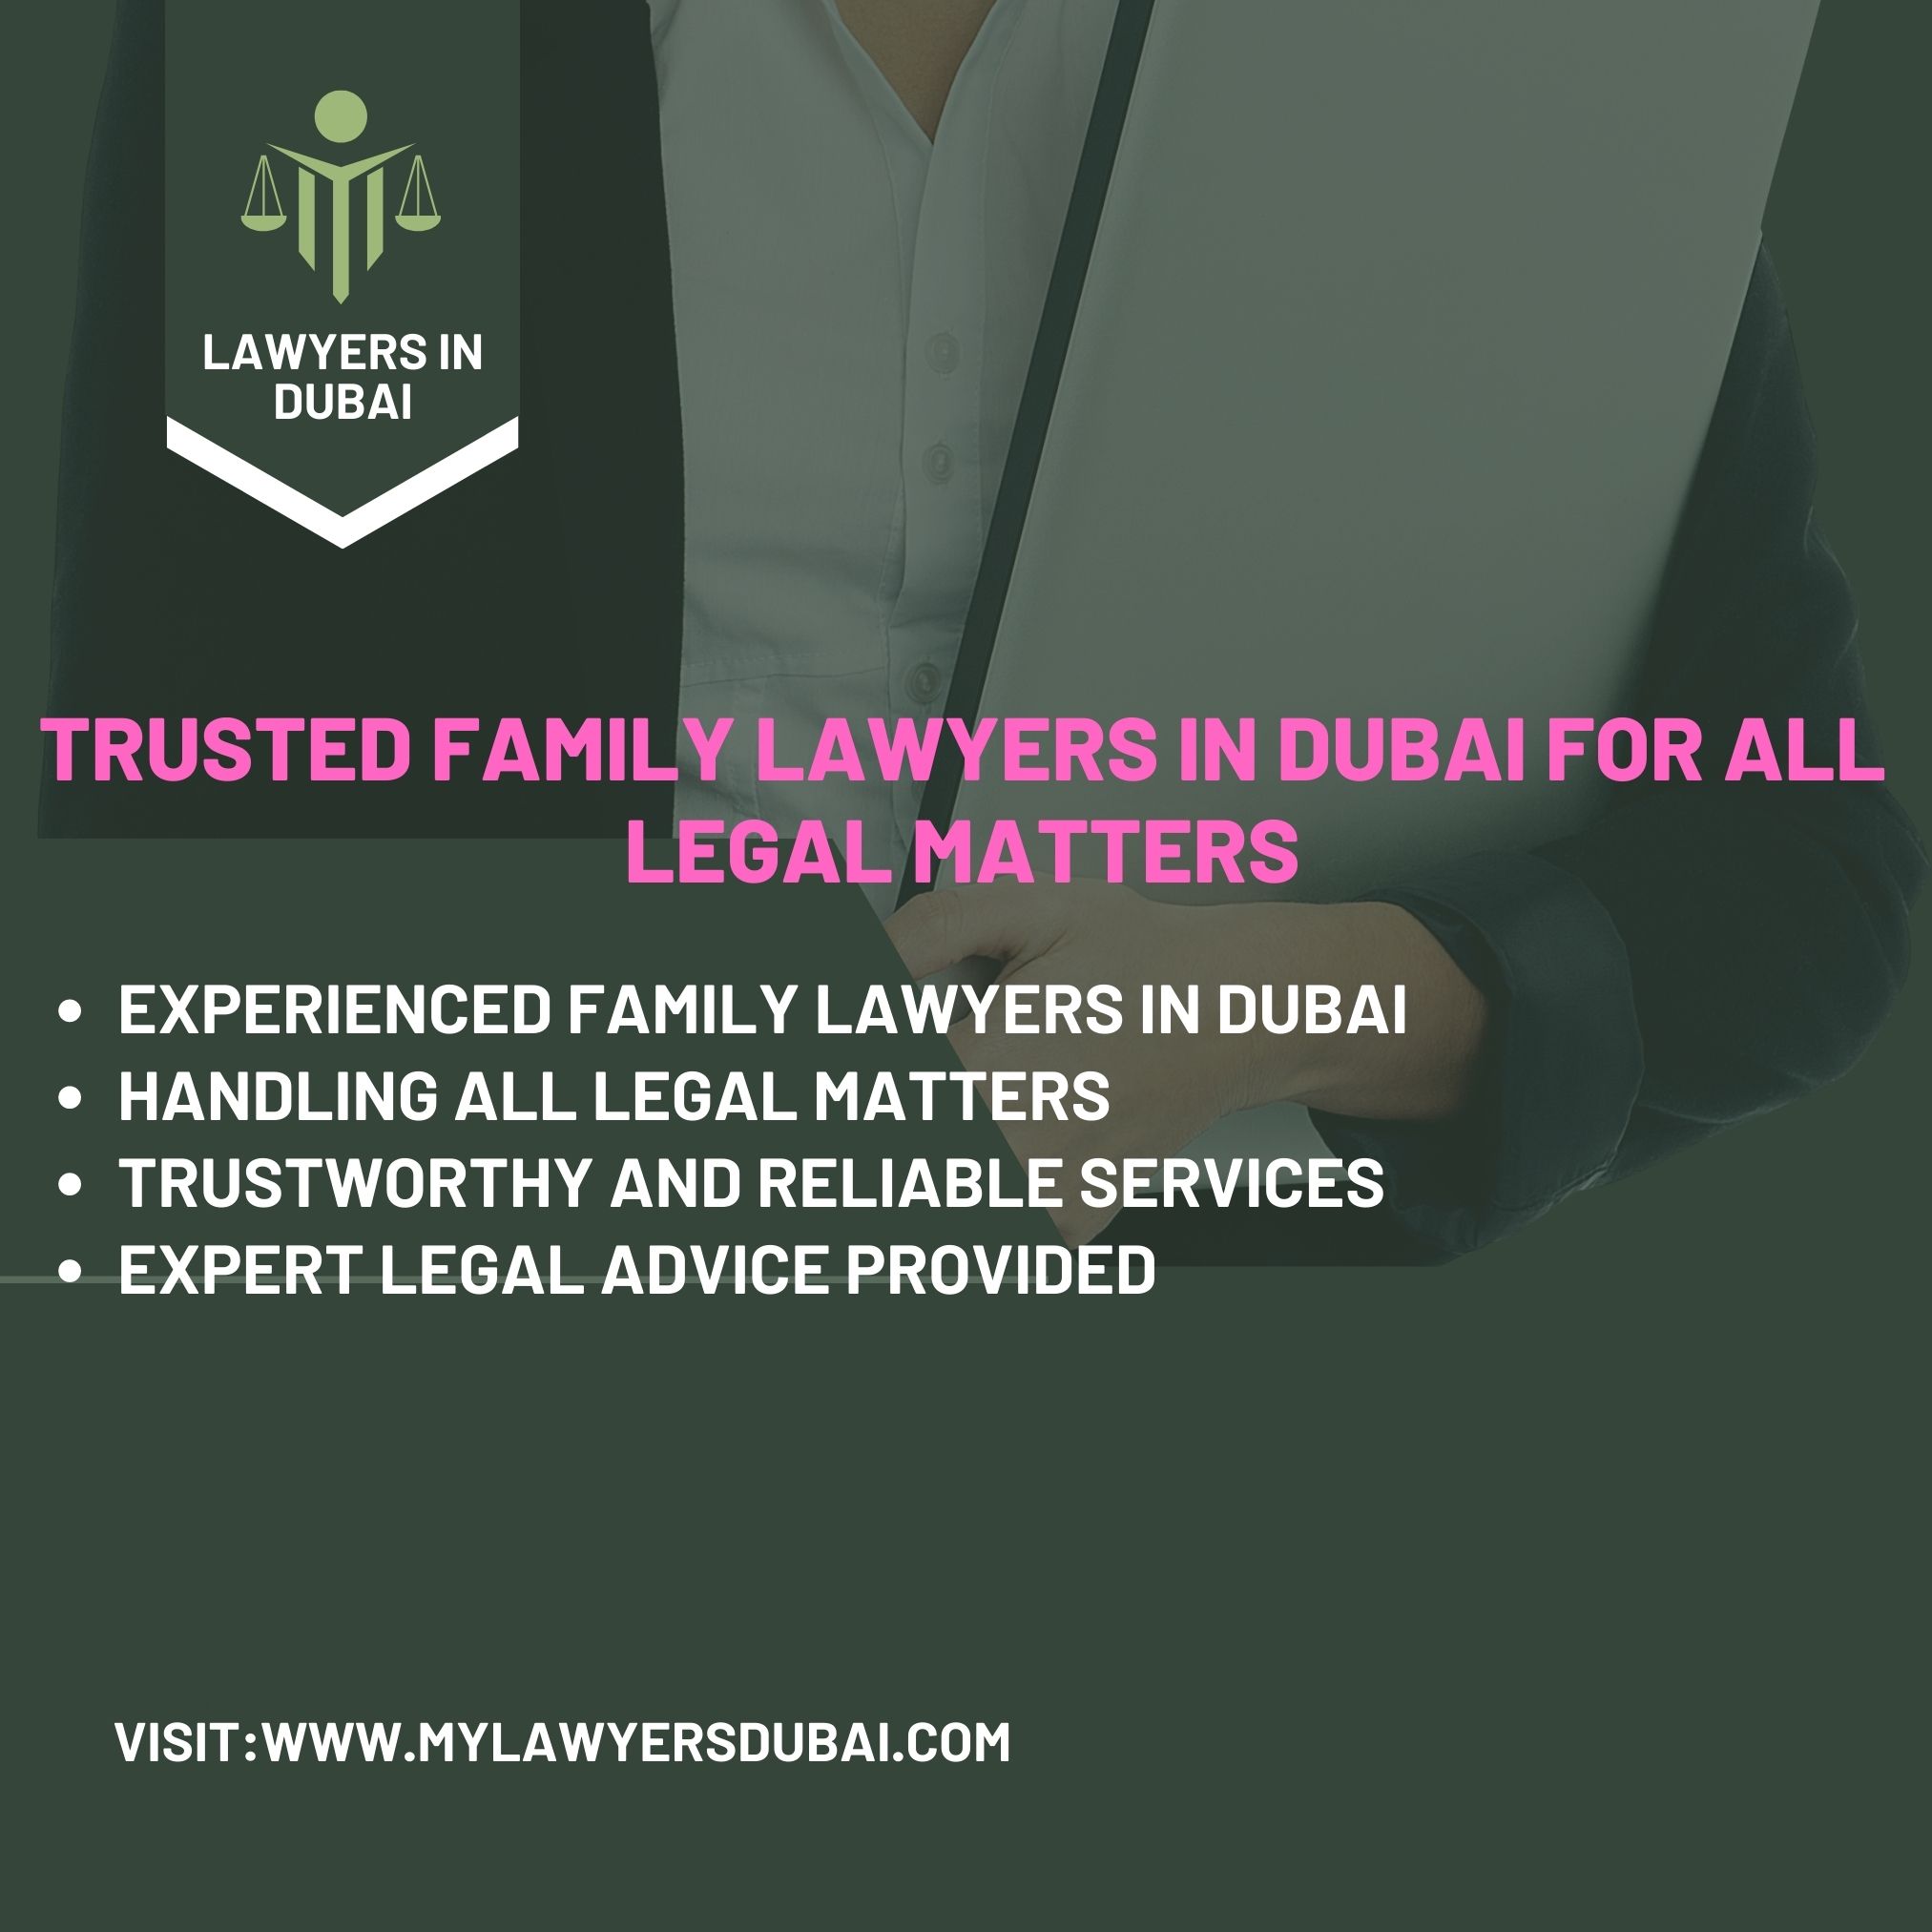 Experienced Family Lawyers in Dubai for All Legal Matters